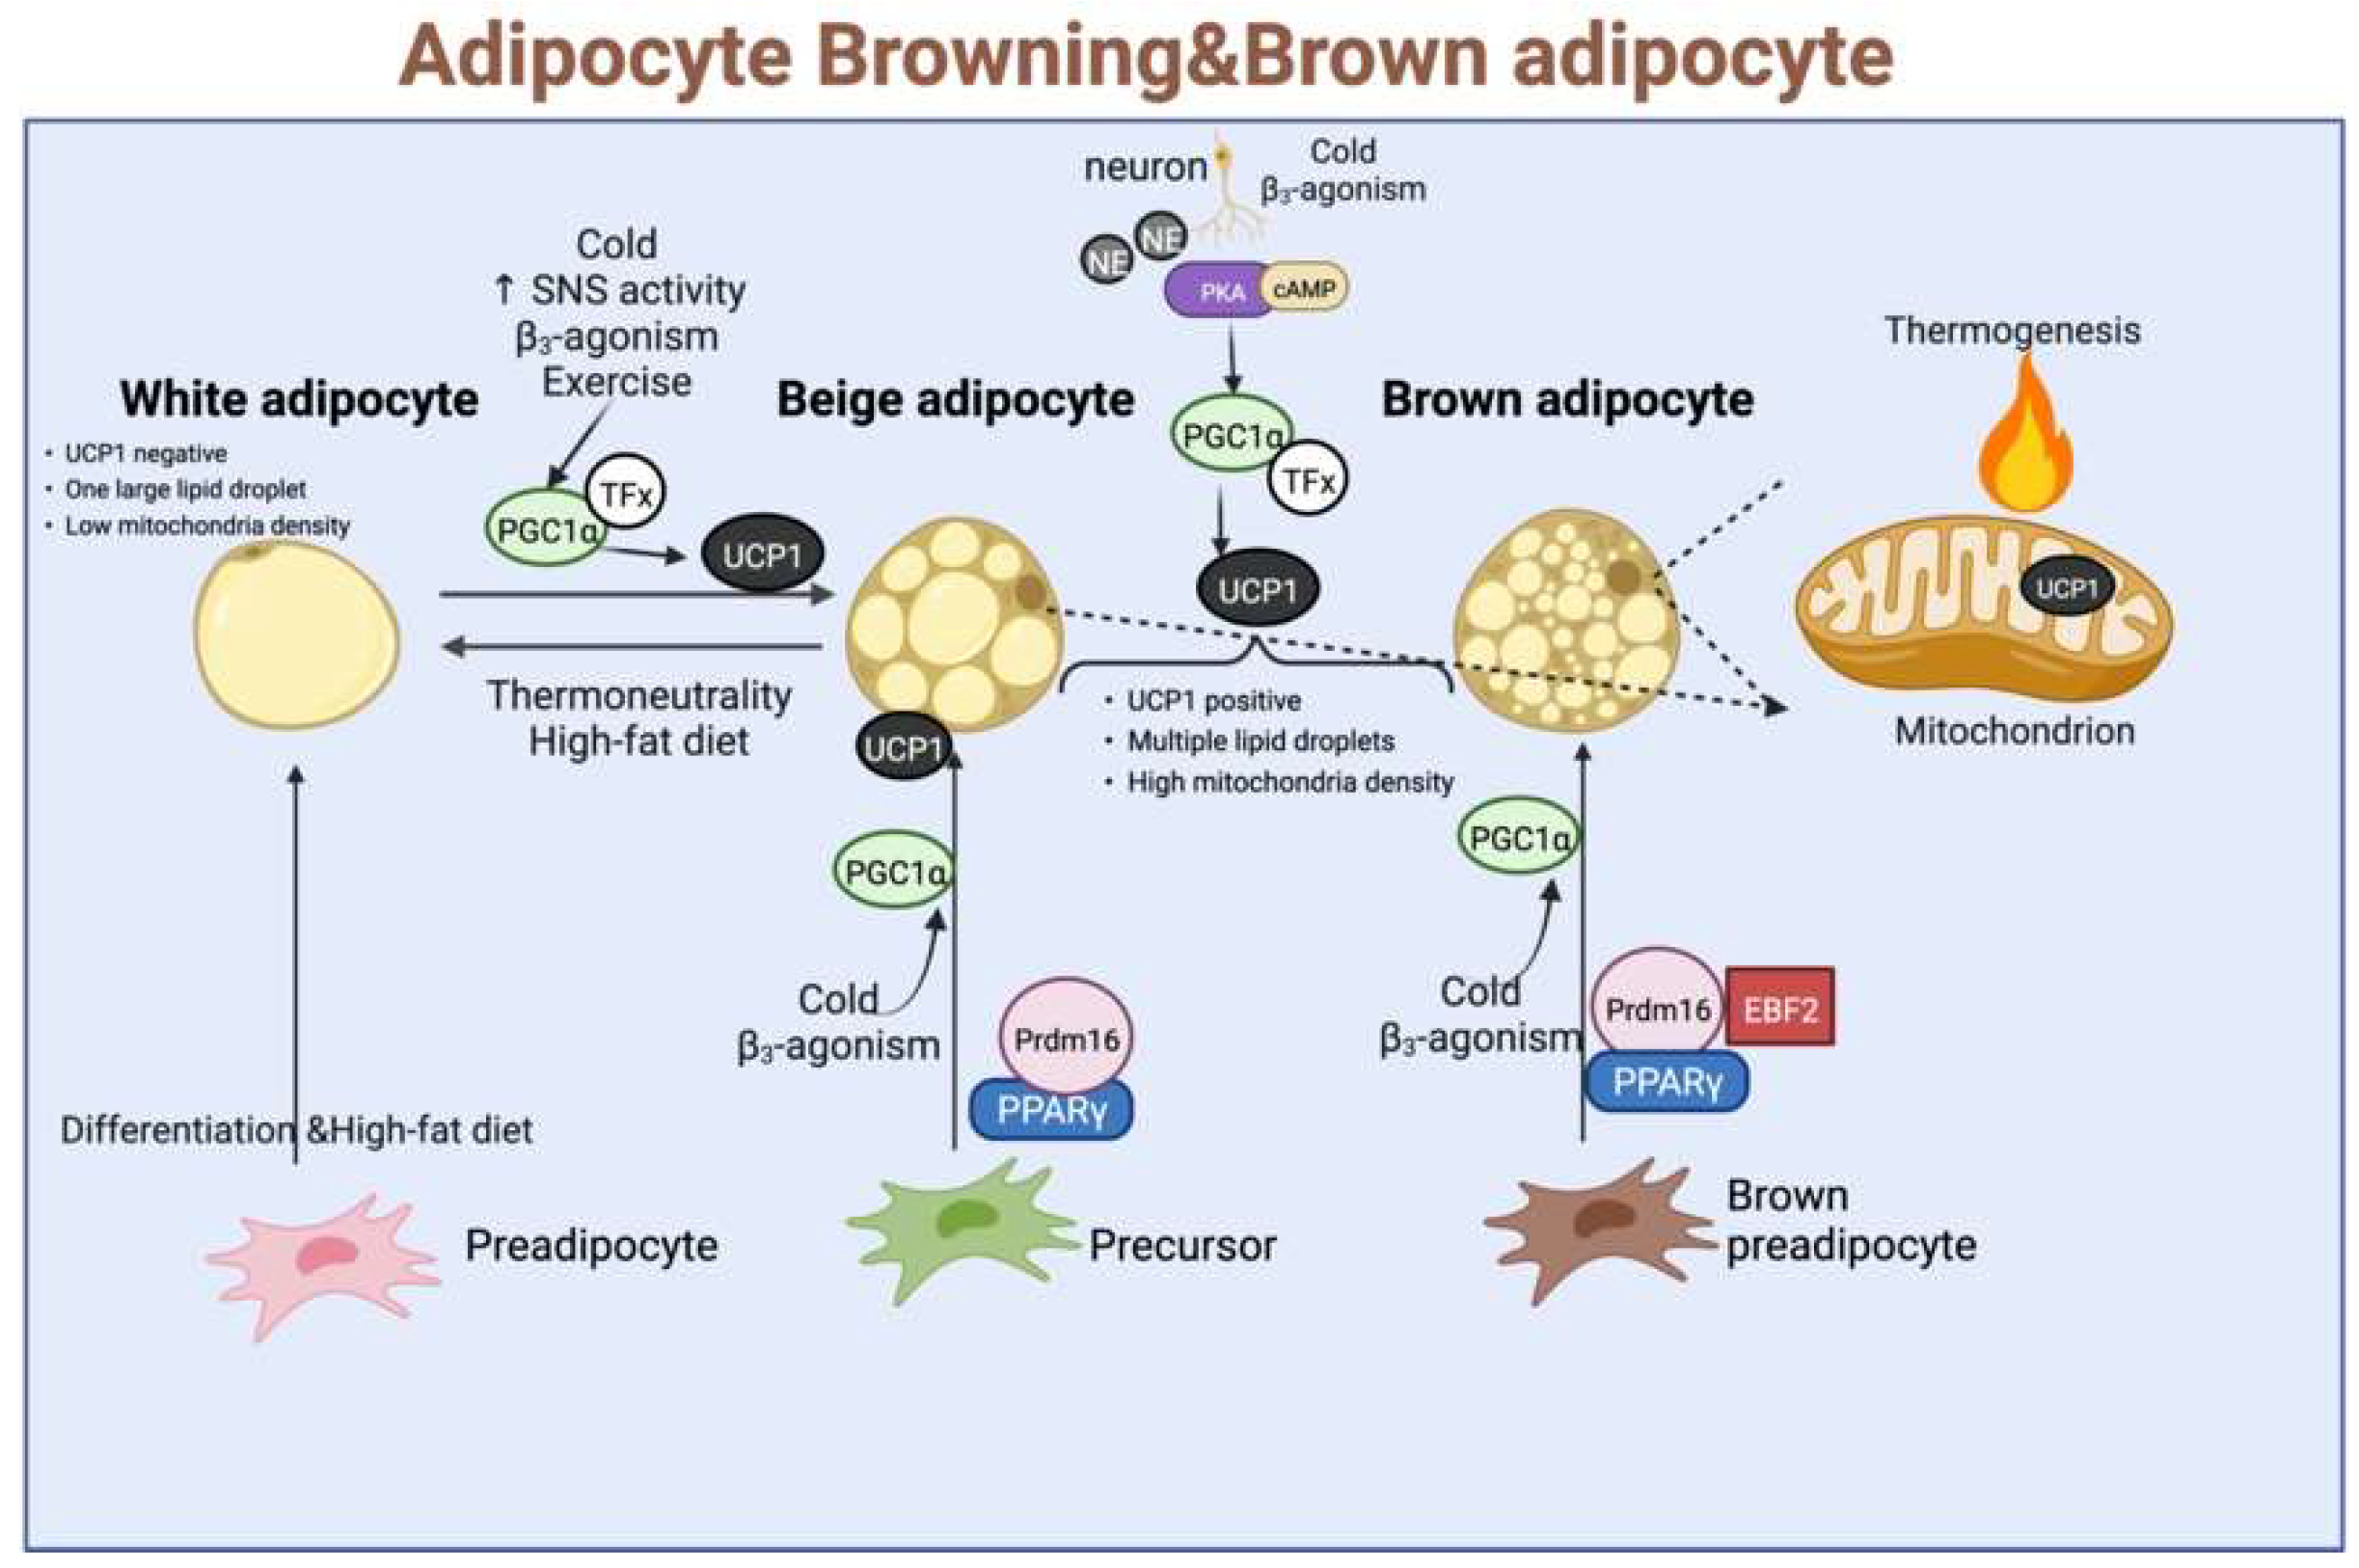 Browning of the white adipose tissue regulation: new insights into